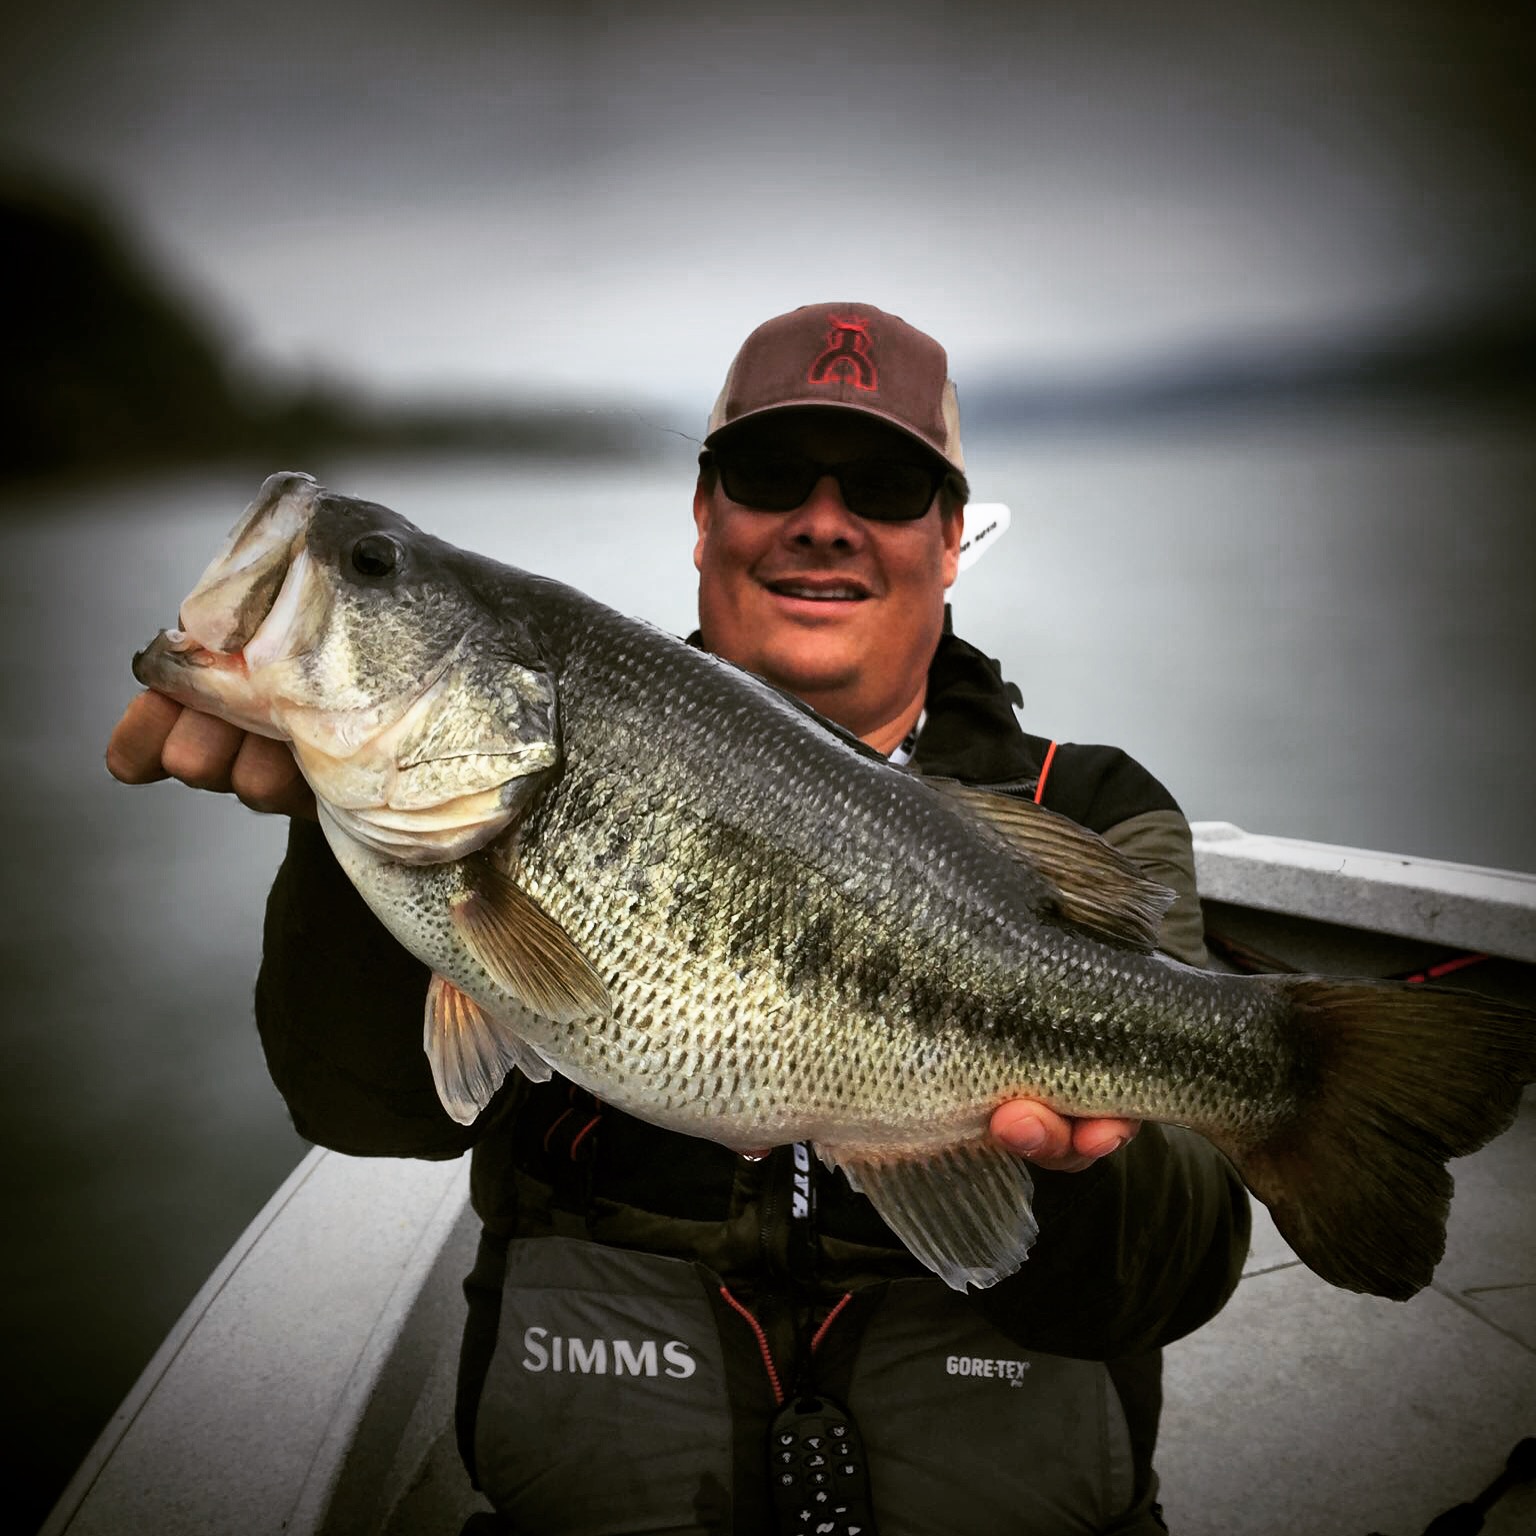 Top 7 Bass Fishing Lures